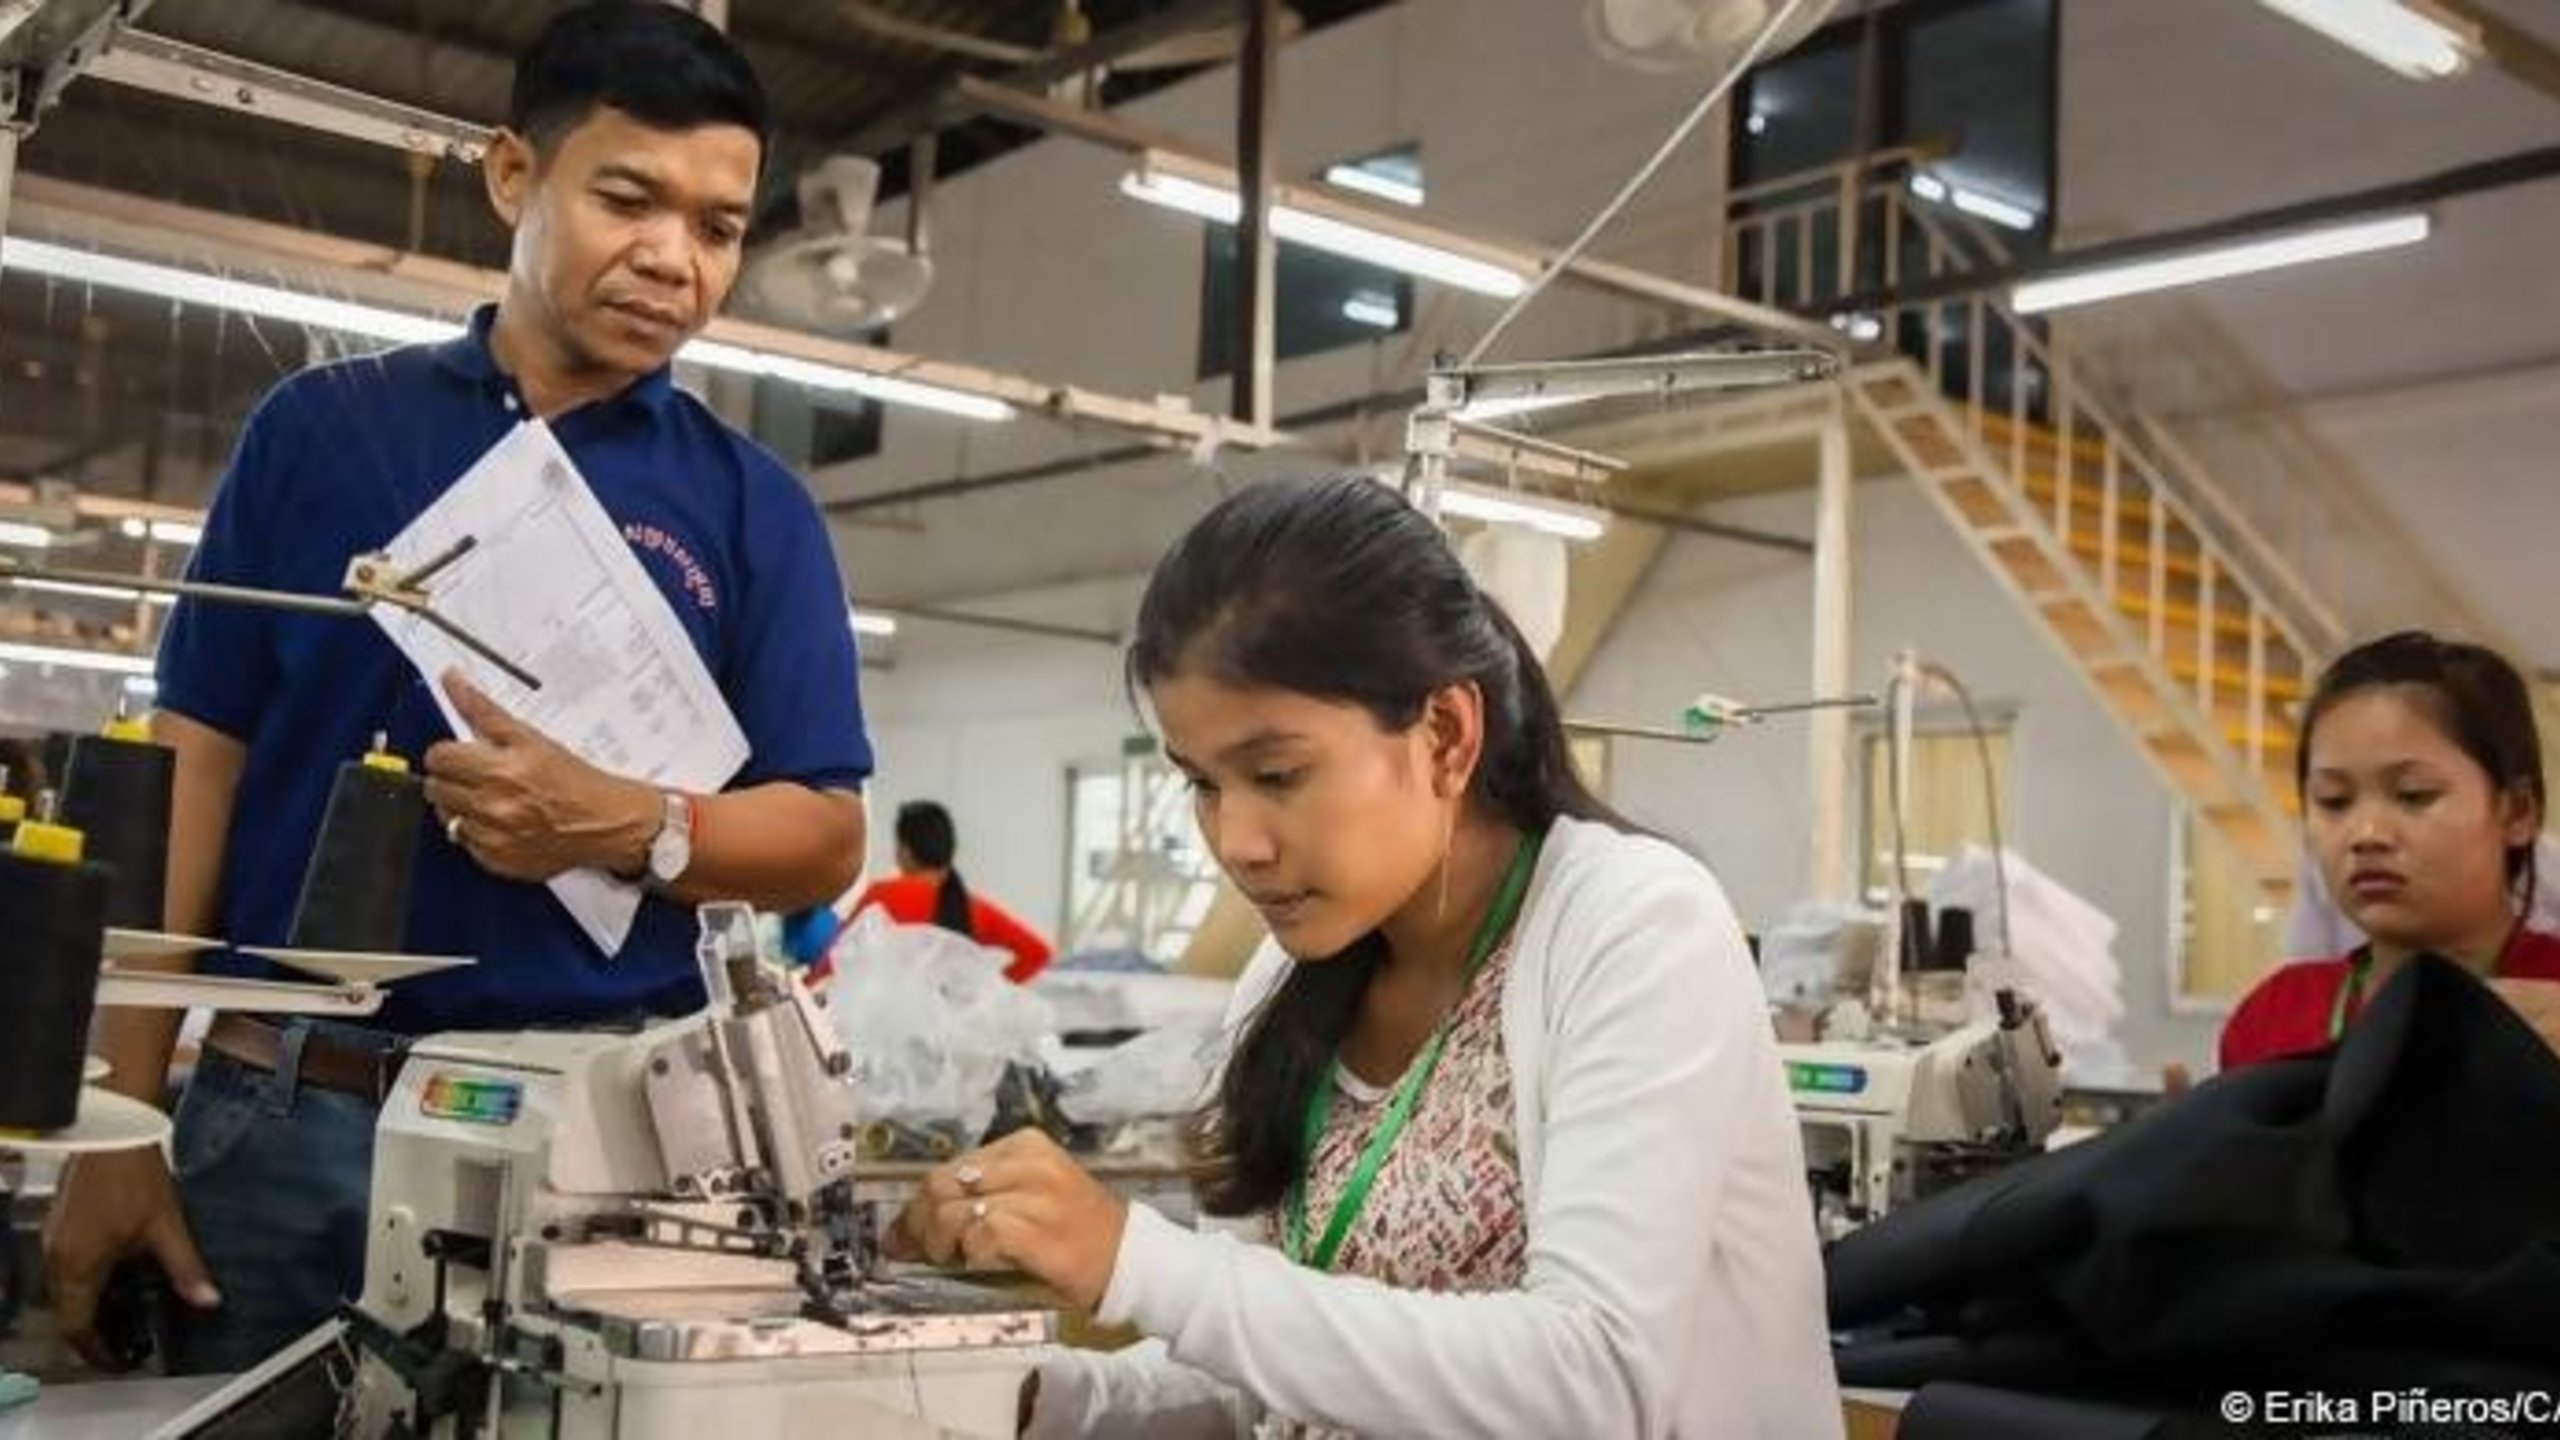 Research, Advocacy and Action to Combat Gender-Based Violence in the Apparel Sector